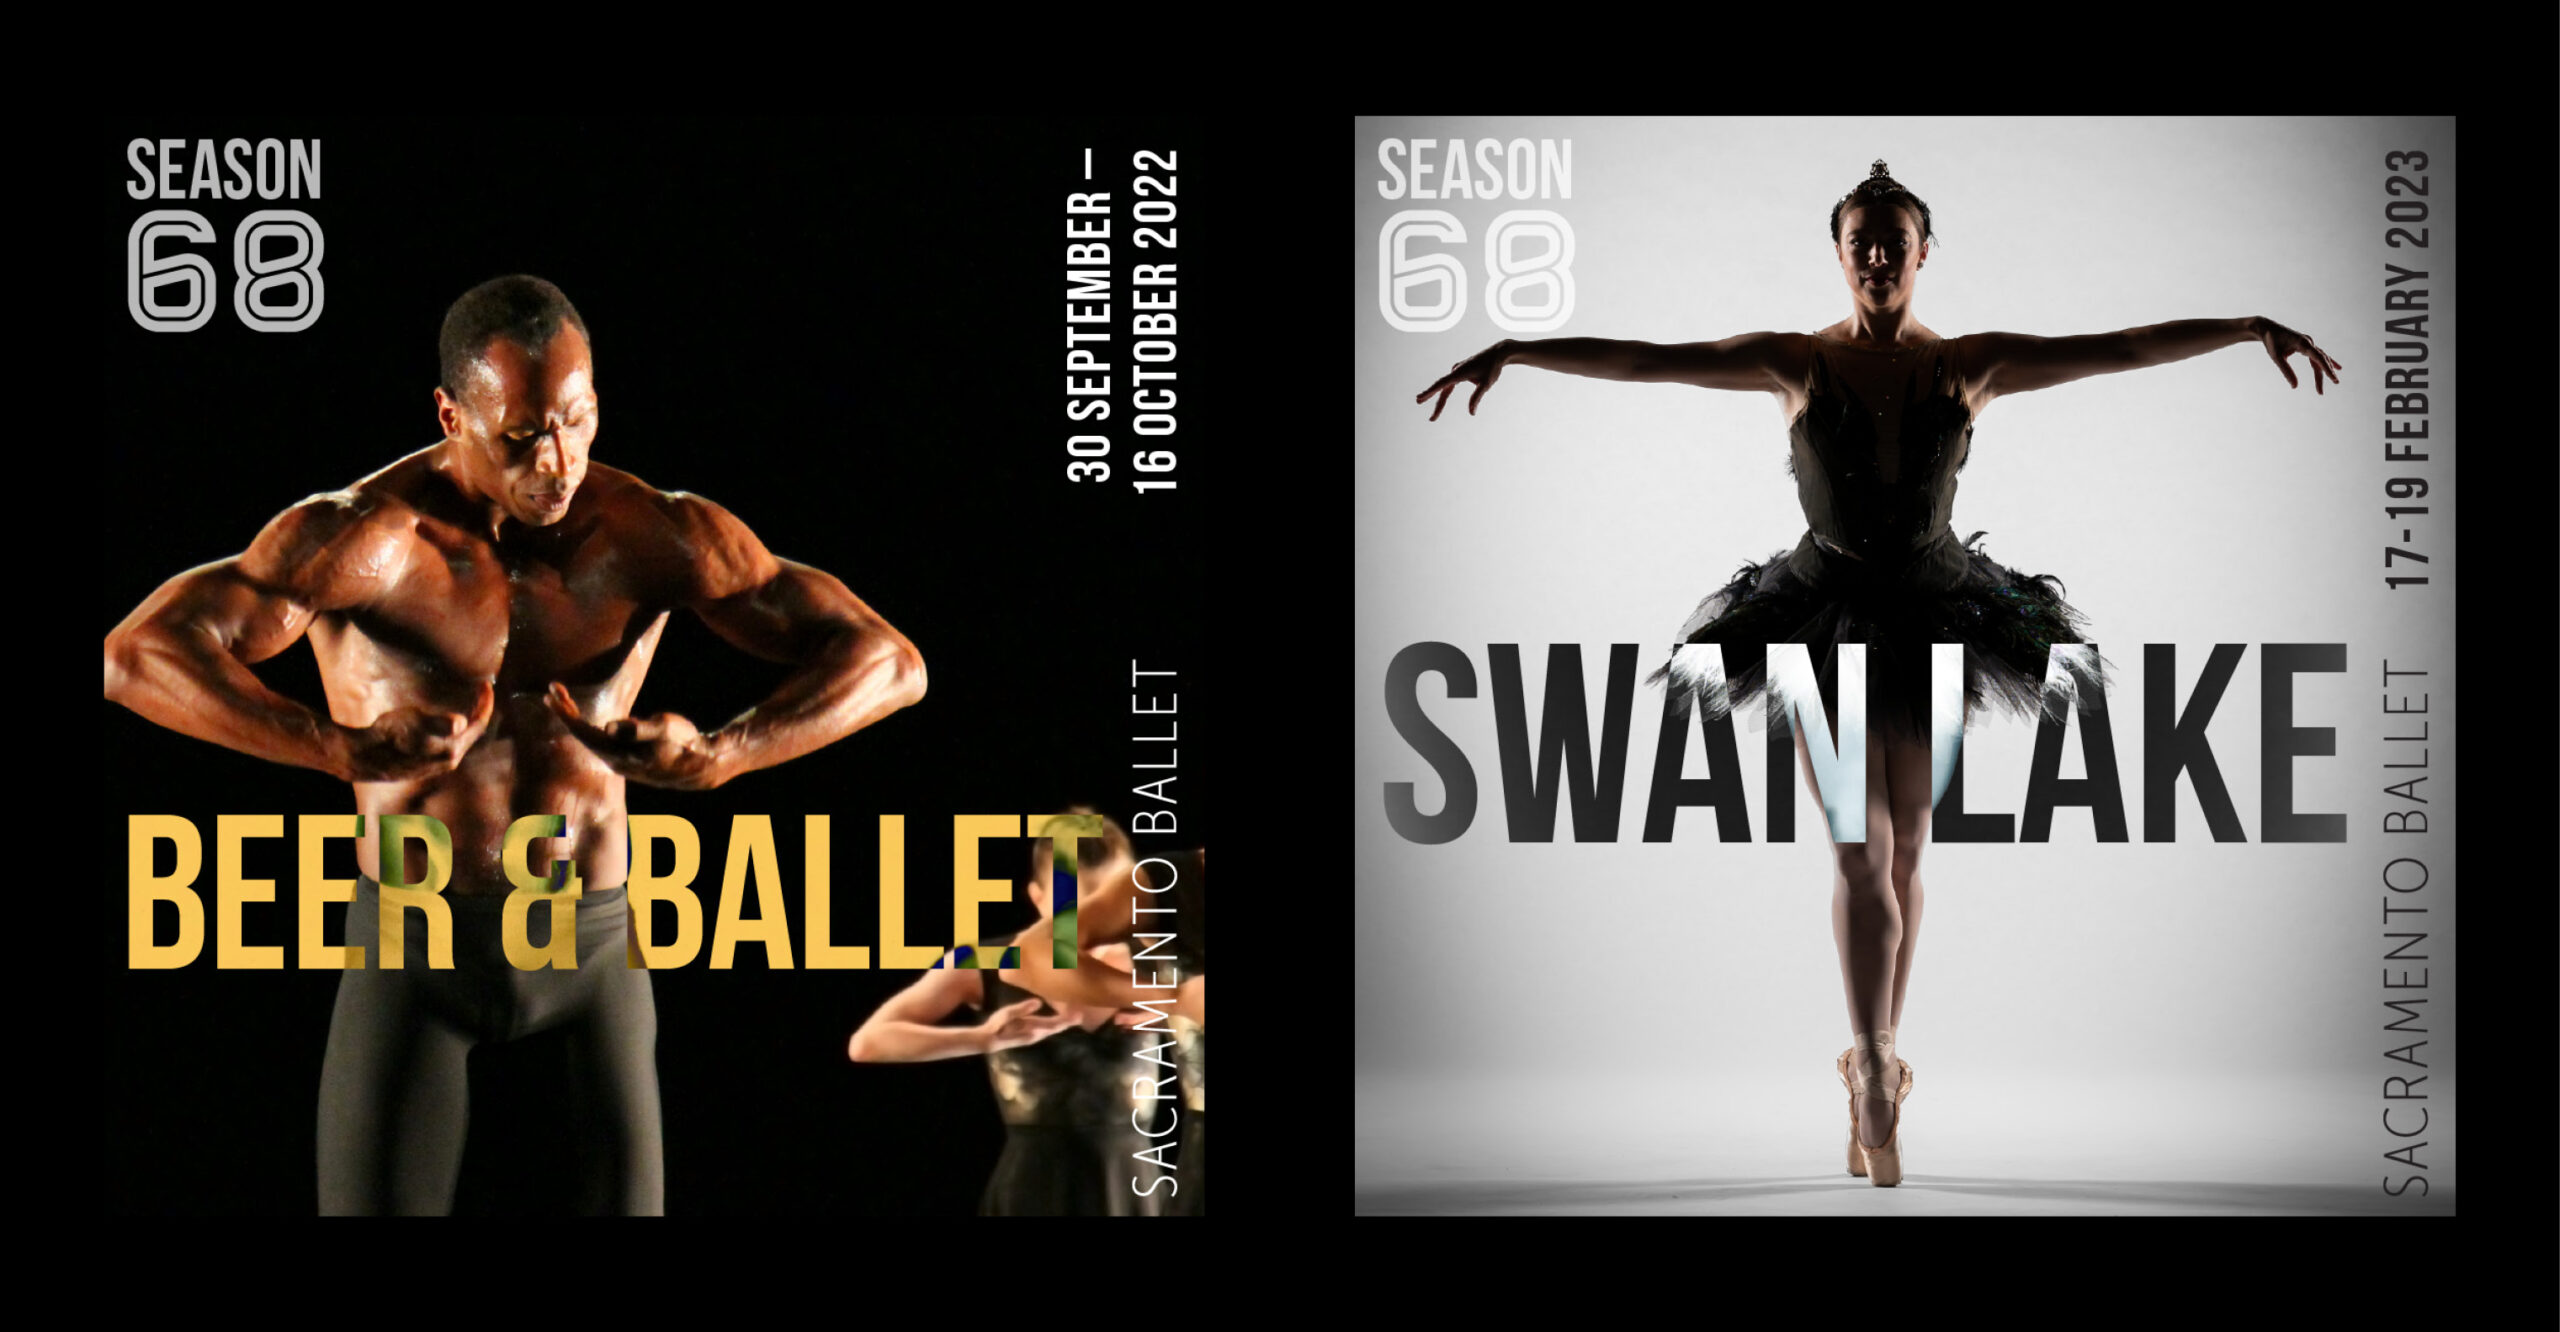 two images with the left showing an extremely muscular dancer standing with arms out tot he sides and text Beer & Ballet and the other showing a ballerina standing on pointe with the words Swan Lake